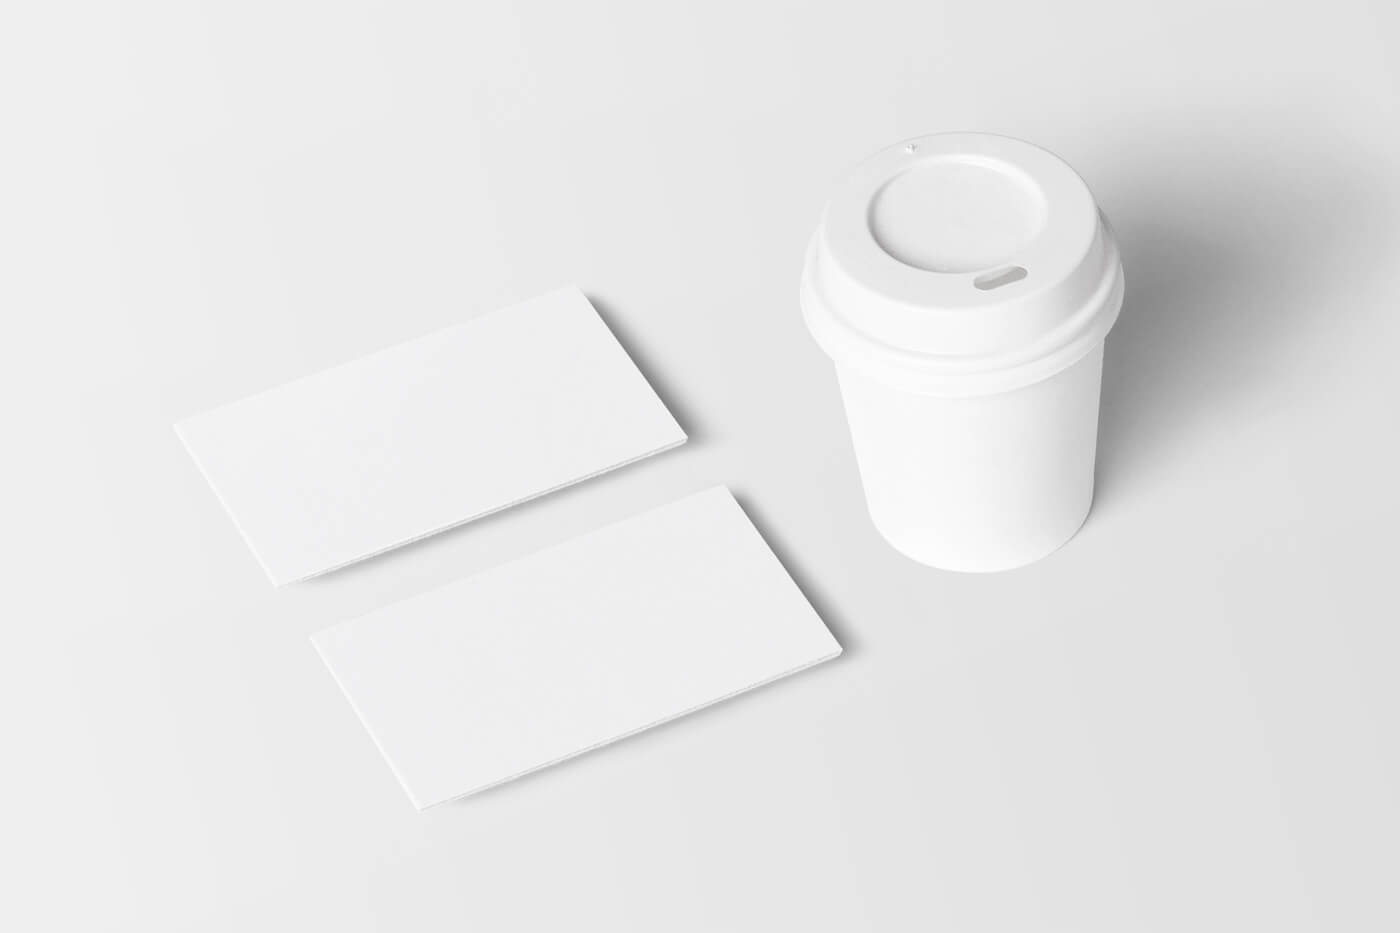 Top Side View of Business Cards Mockup and Coffee Cup